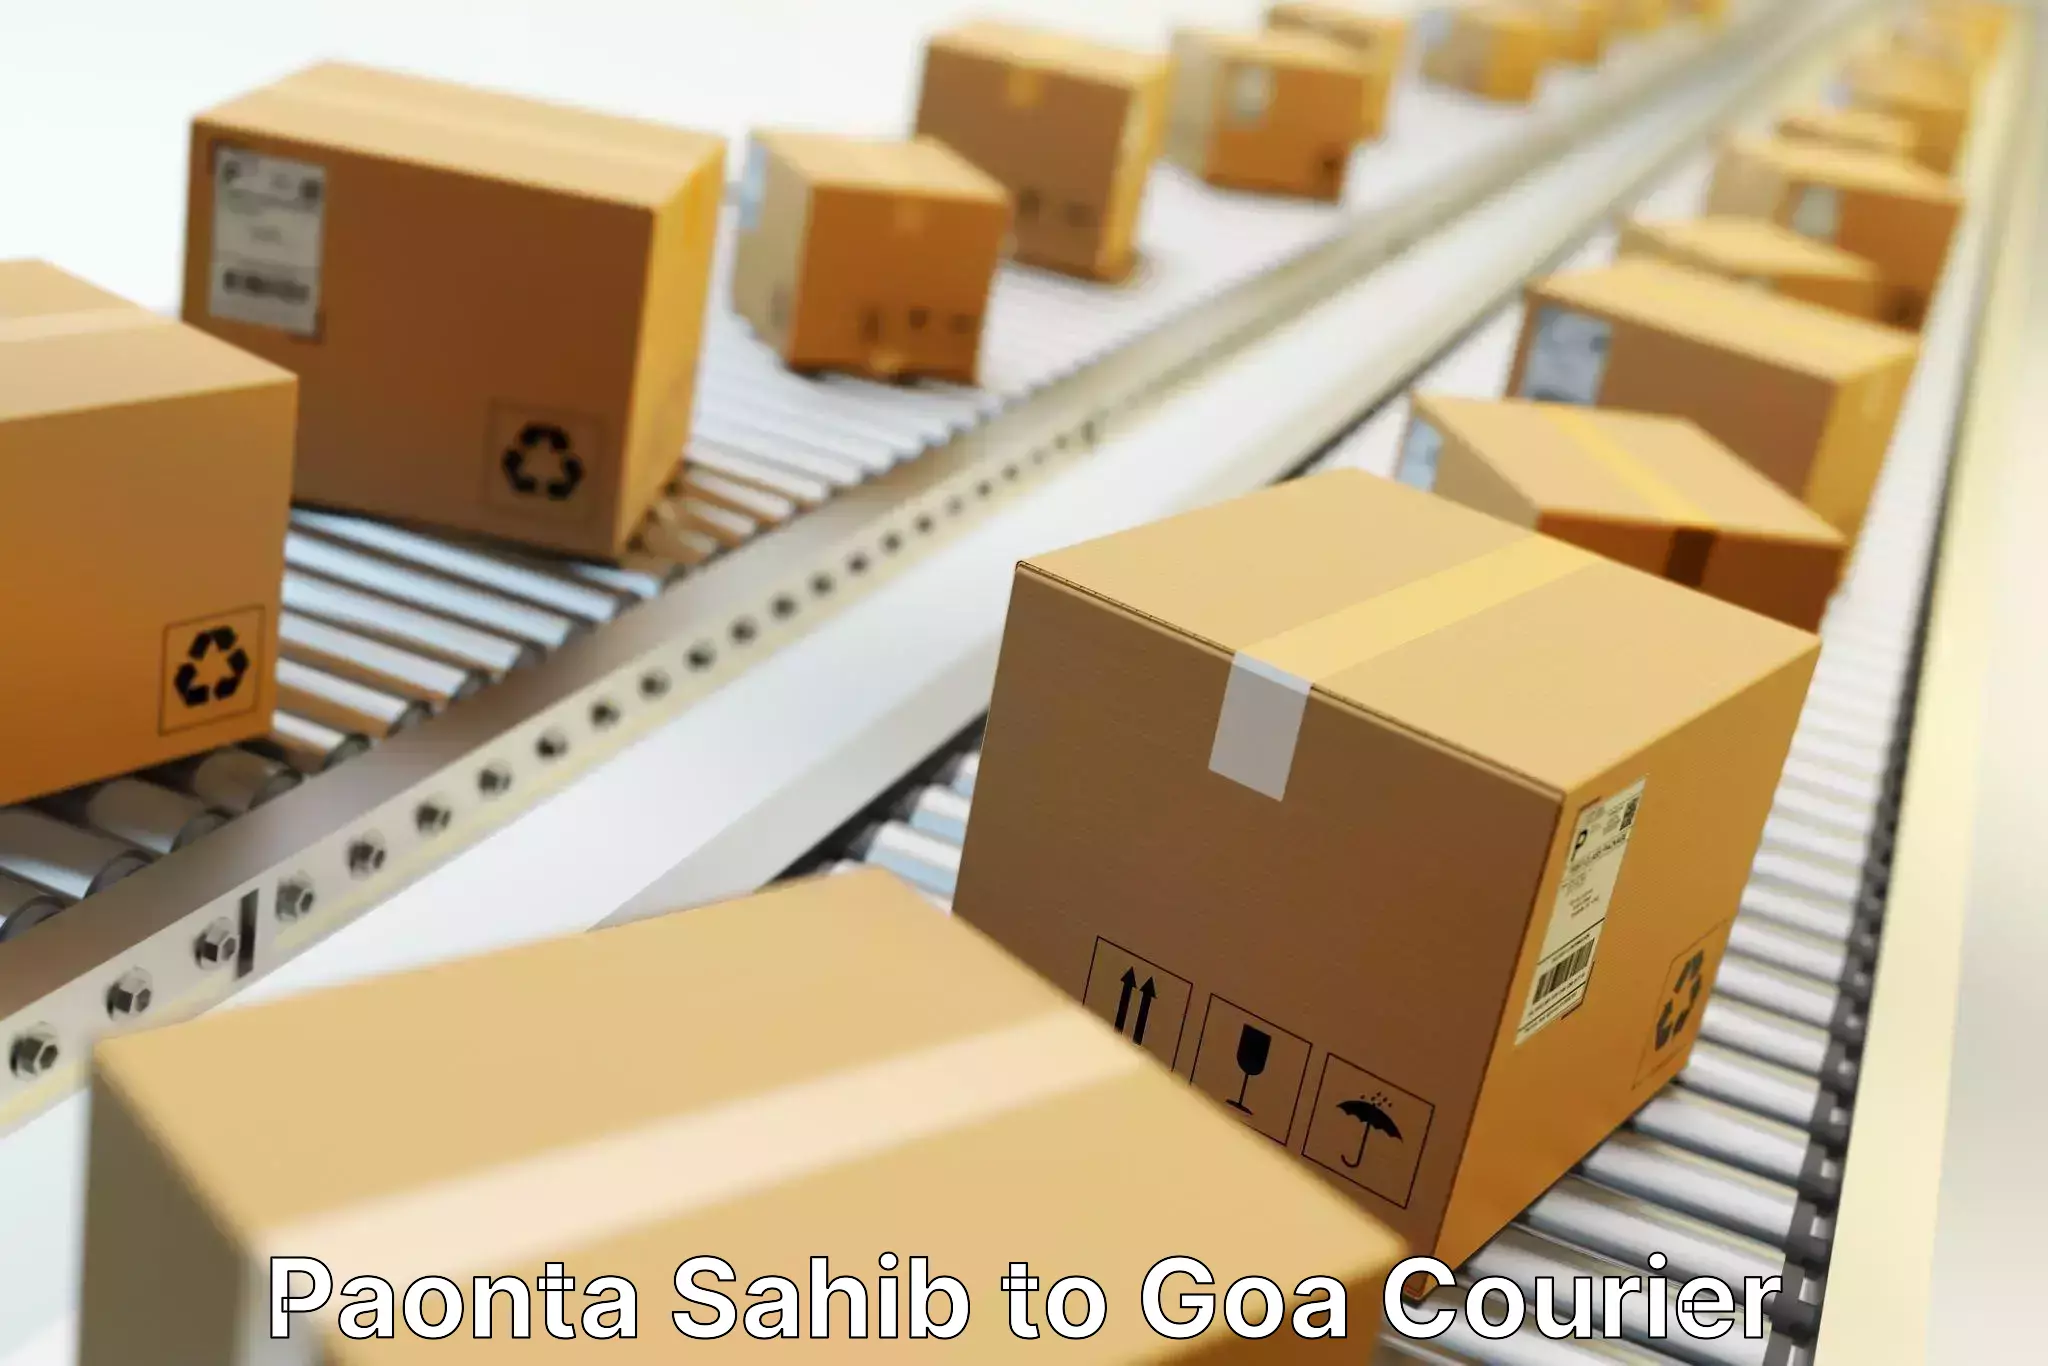 Online shipping calculator in Paonta Sahib to South Goa